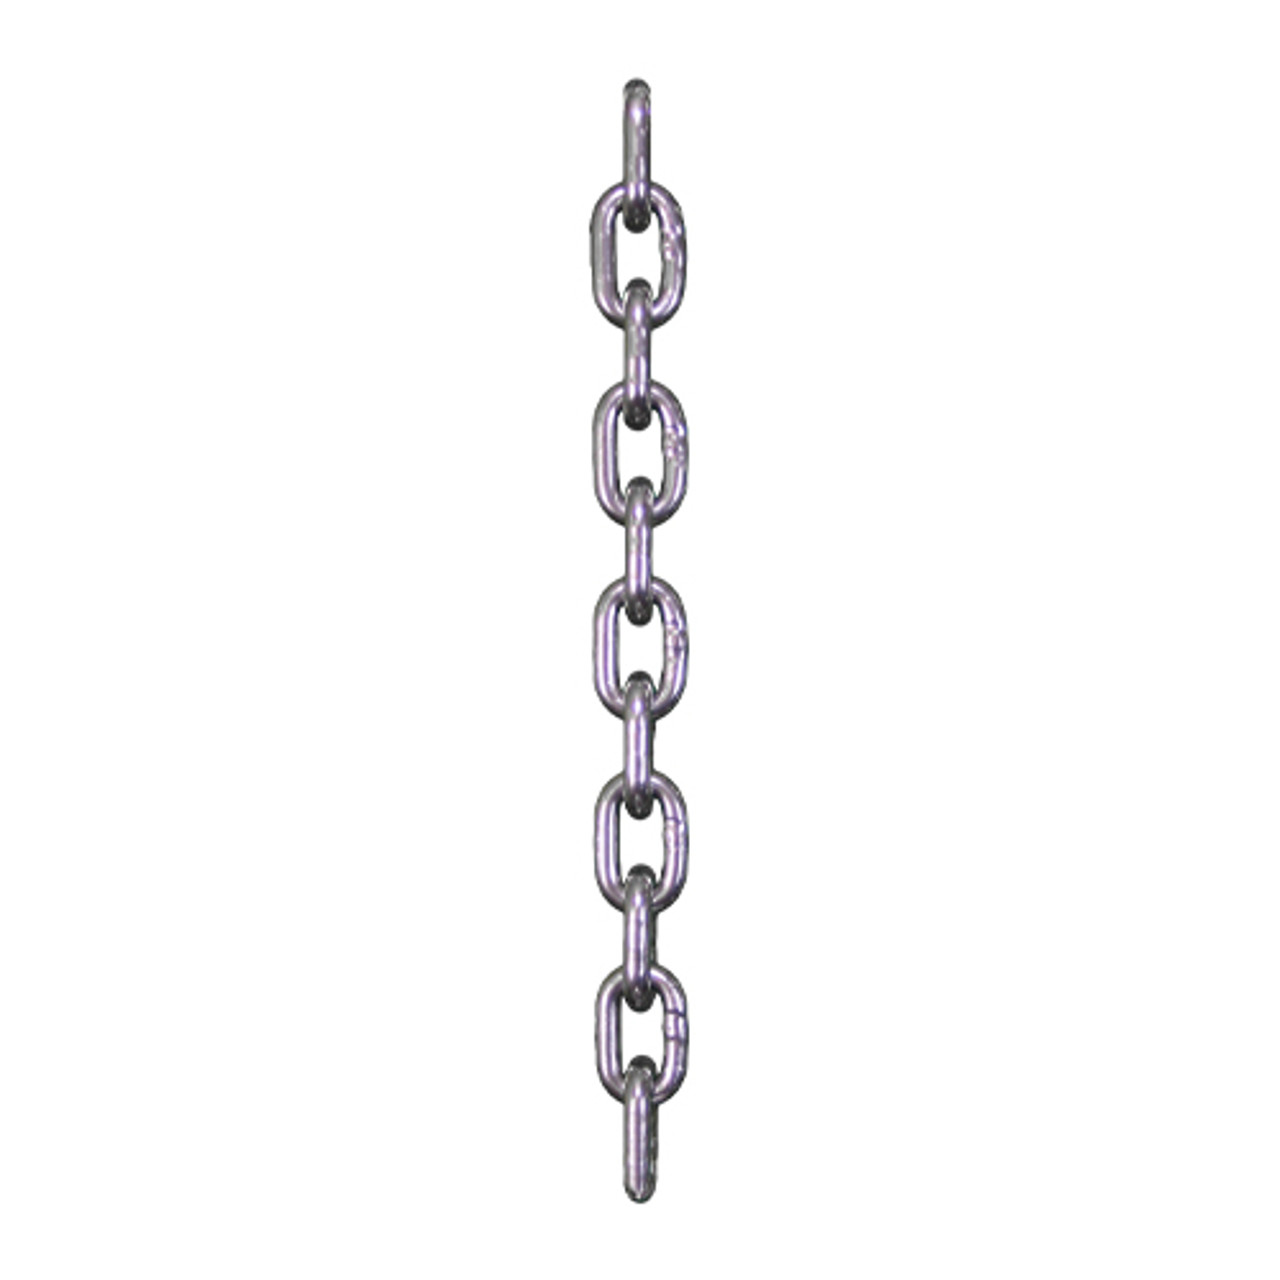 Metal Ring Mesh - Chain Braided and S Hook Type